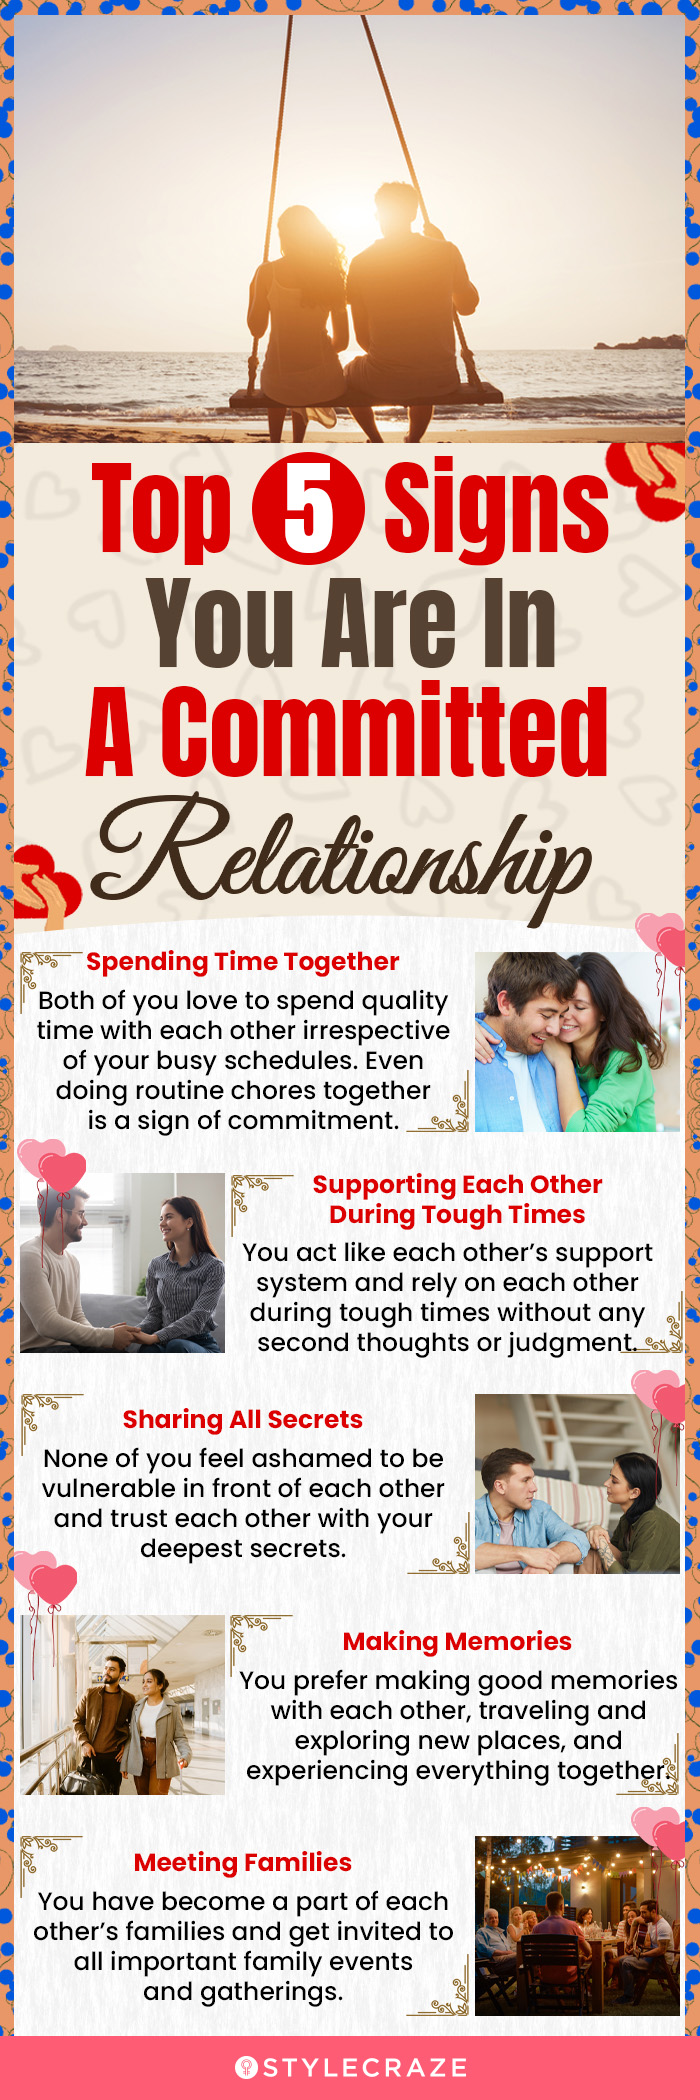 top 5 signs you are in a committed relationship (infographic)